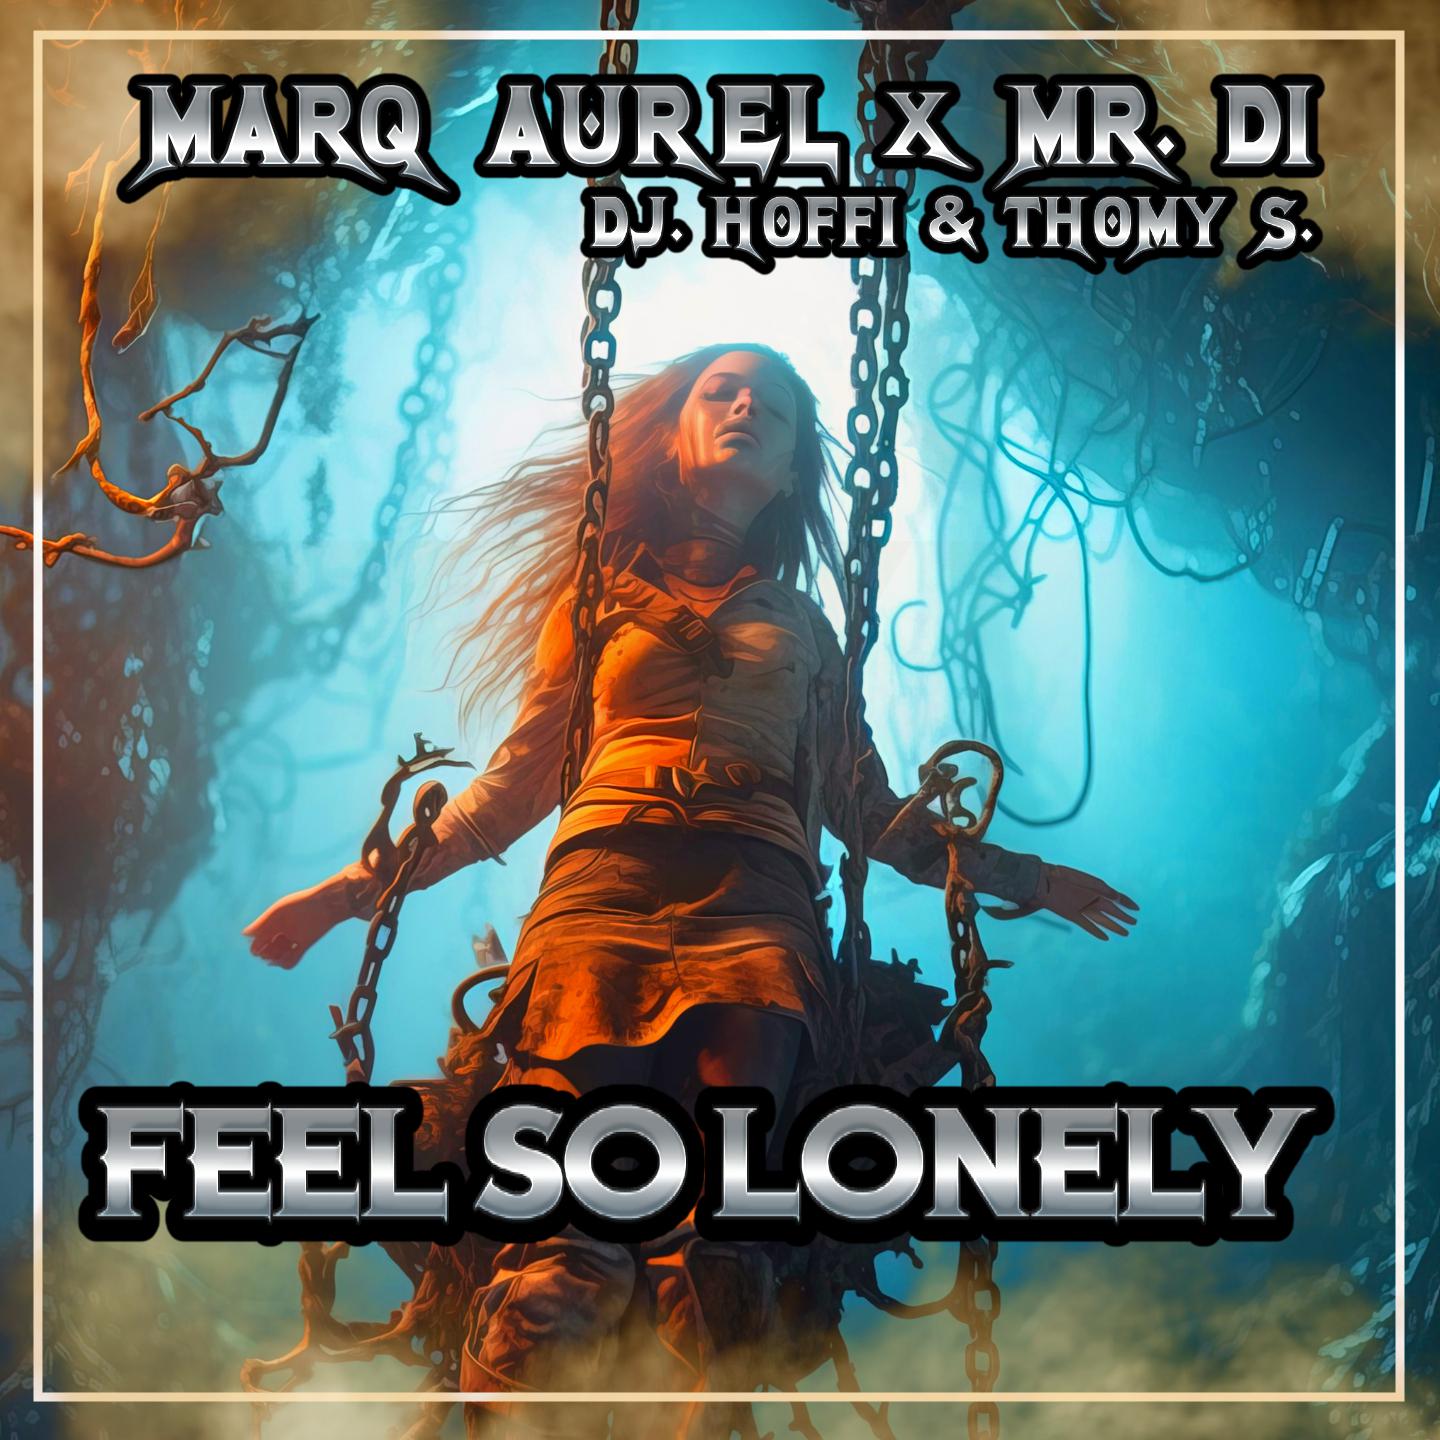 Marq Aurel - Feel So Lonely (Hardstyle Mix)